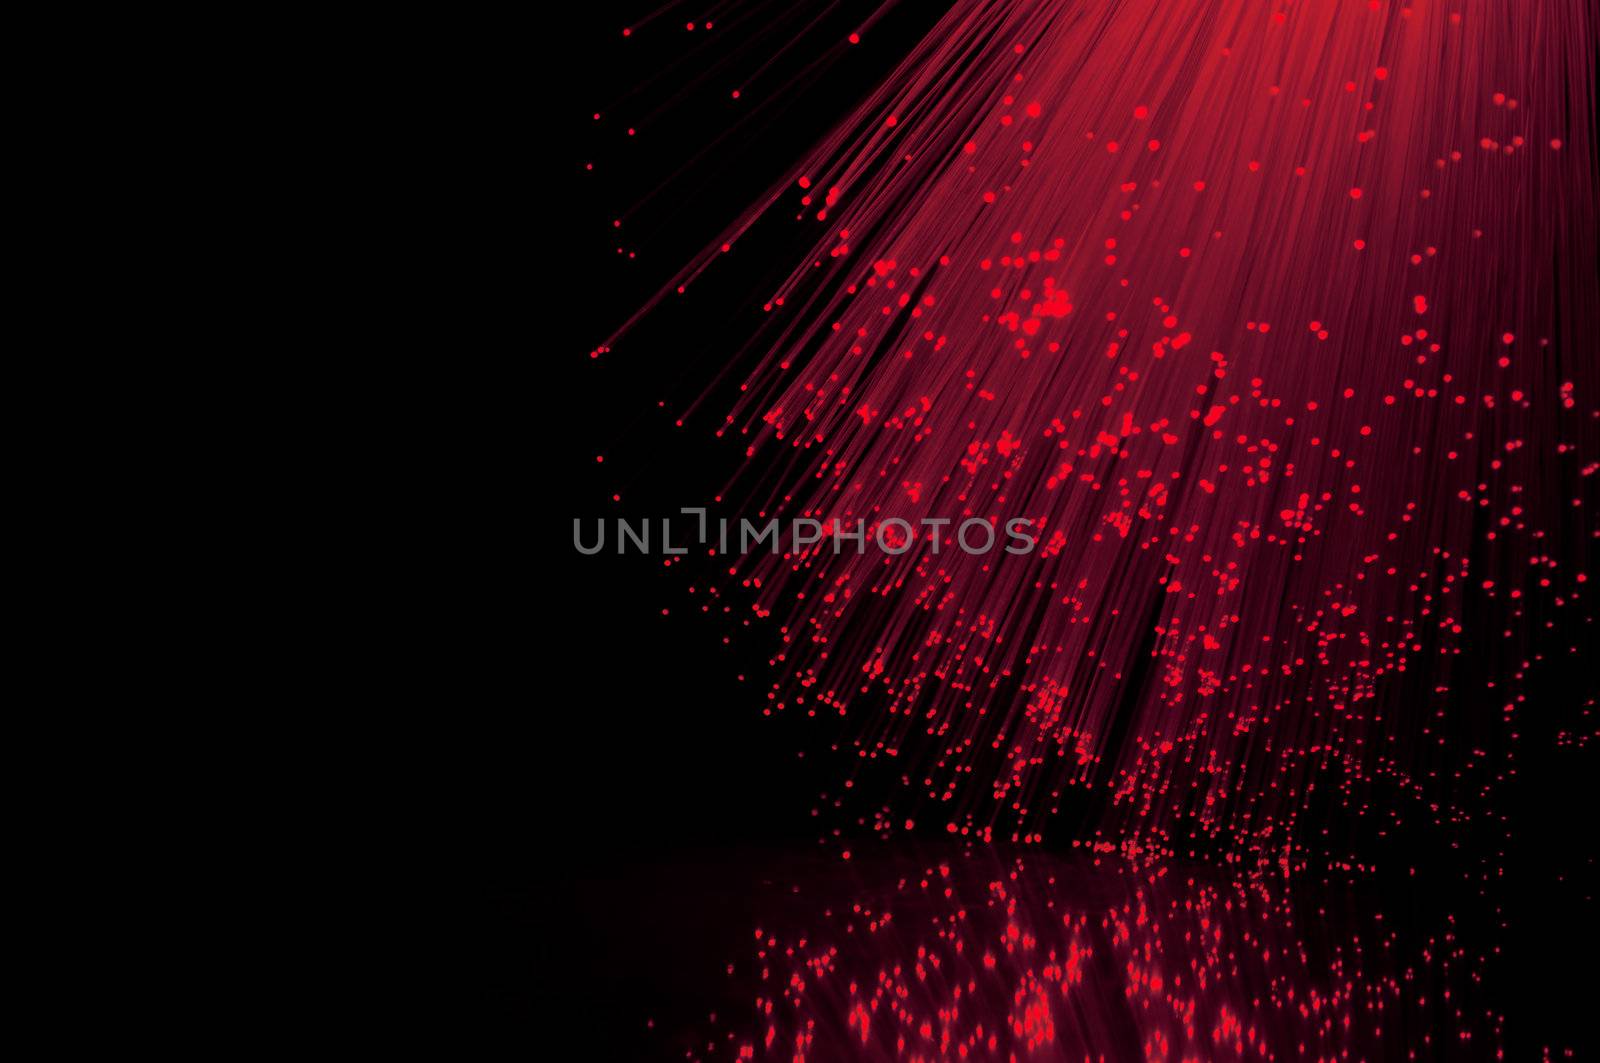 Crimson fiber optic light strands against a black background and reflecting into the foreground.